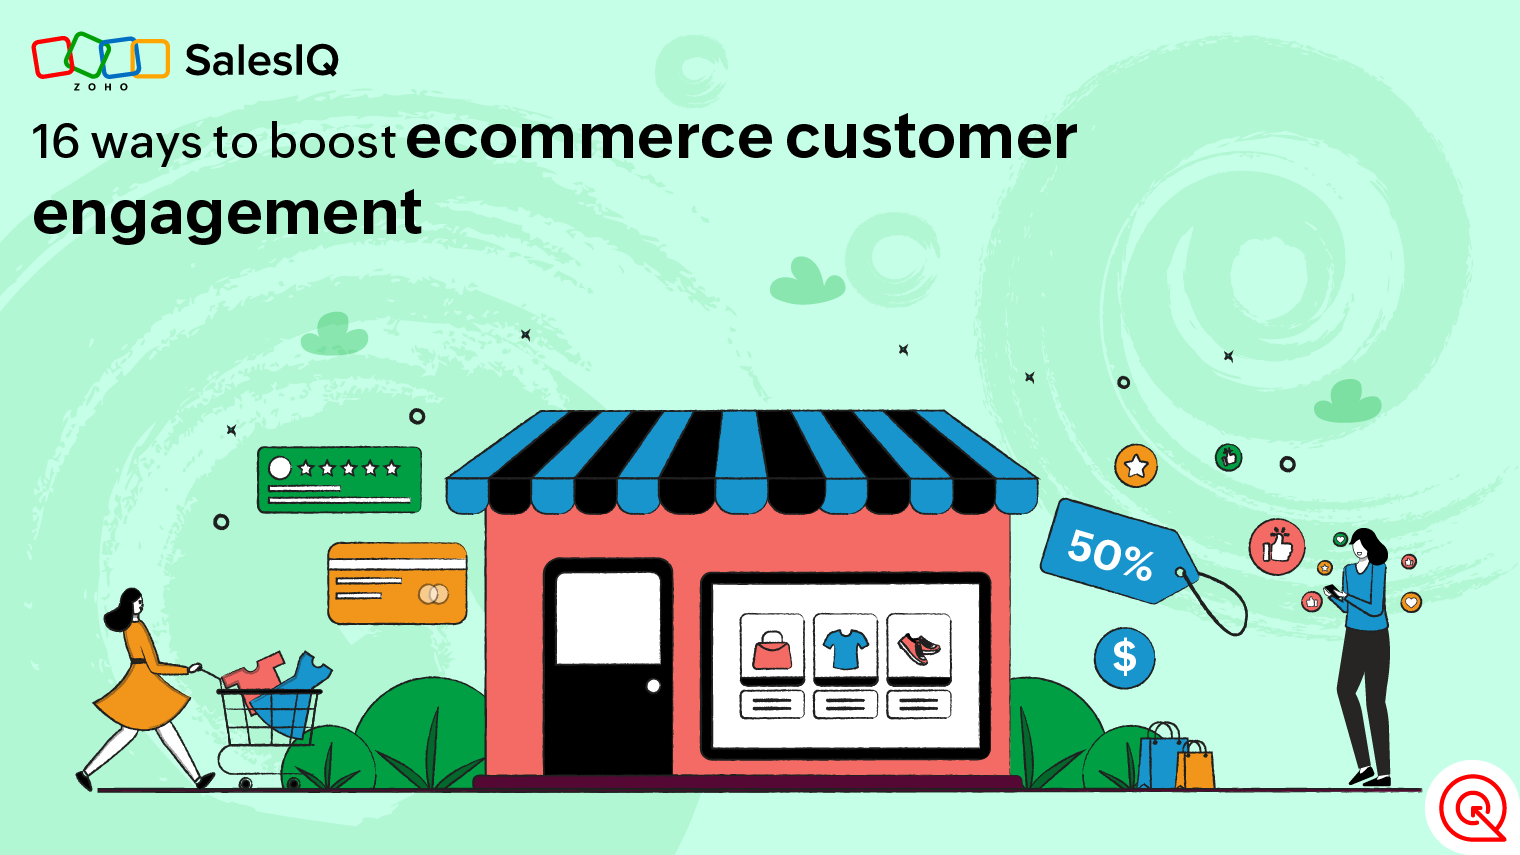 How to boost ecommerce customer engagement